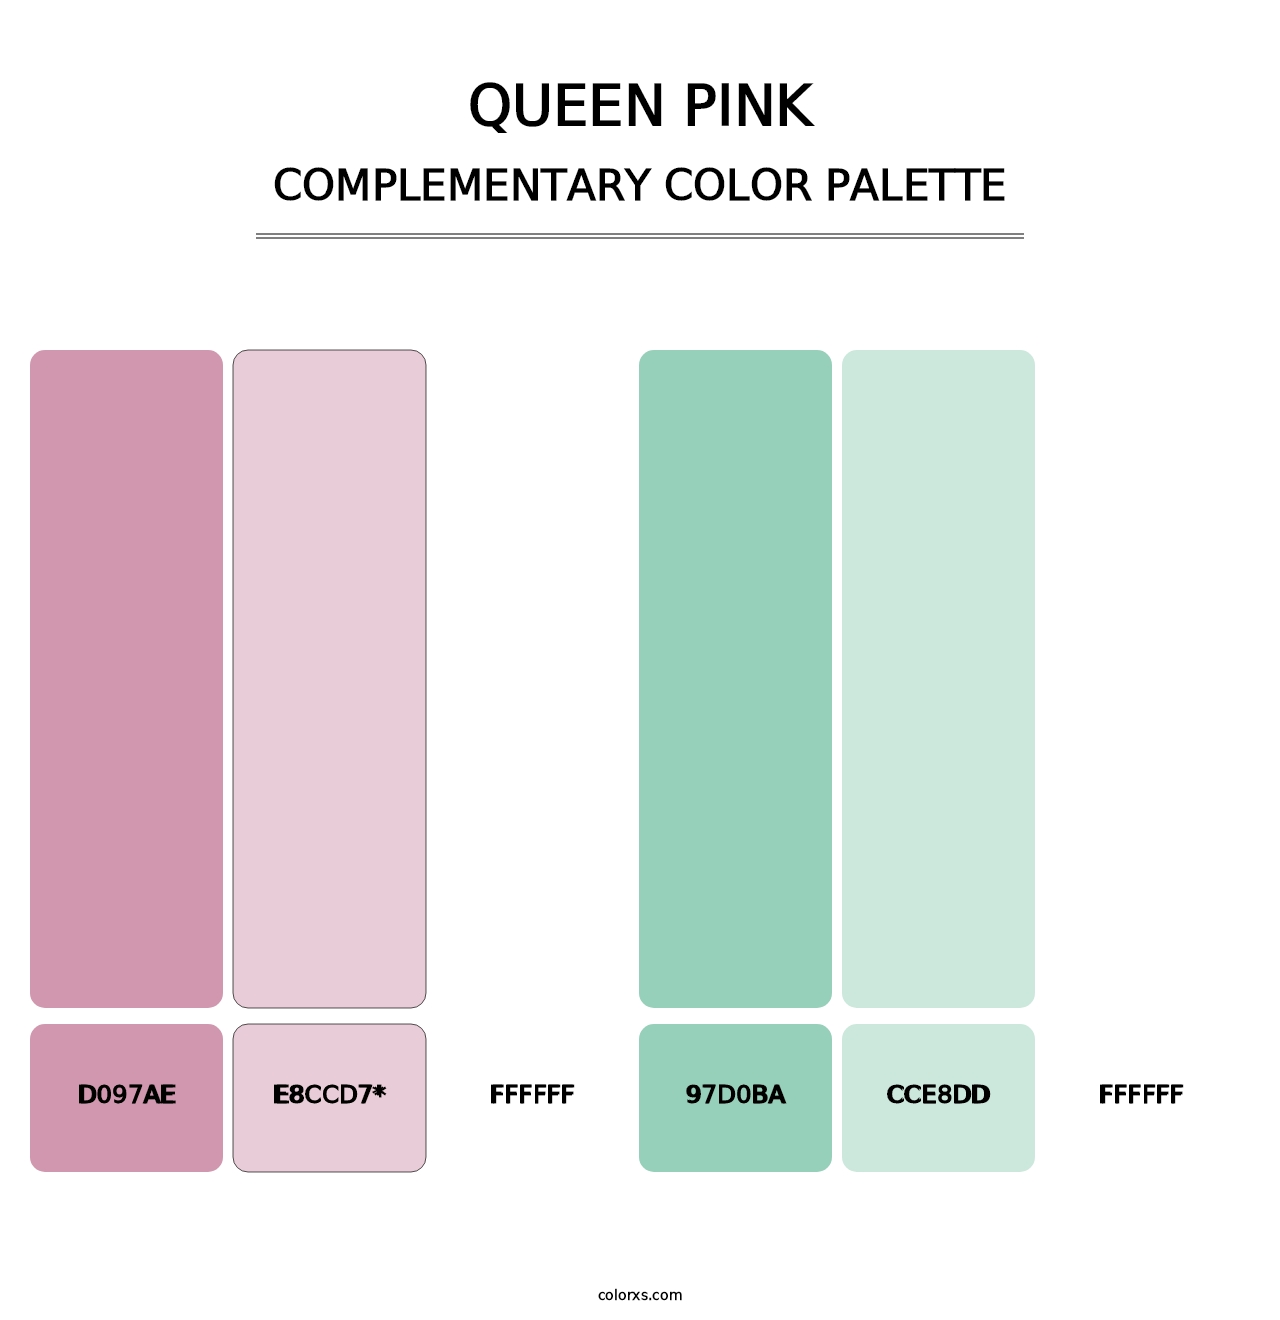 Queen Pink - Complementary Color Palette